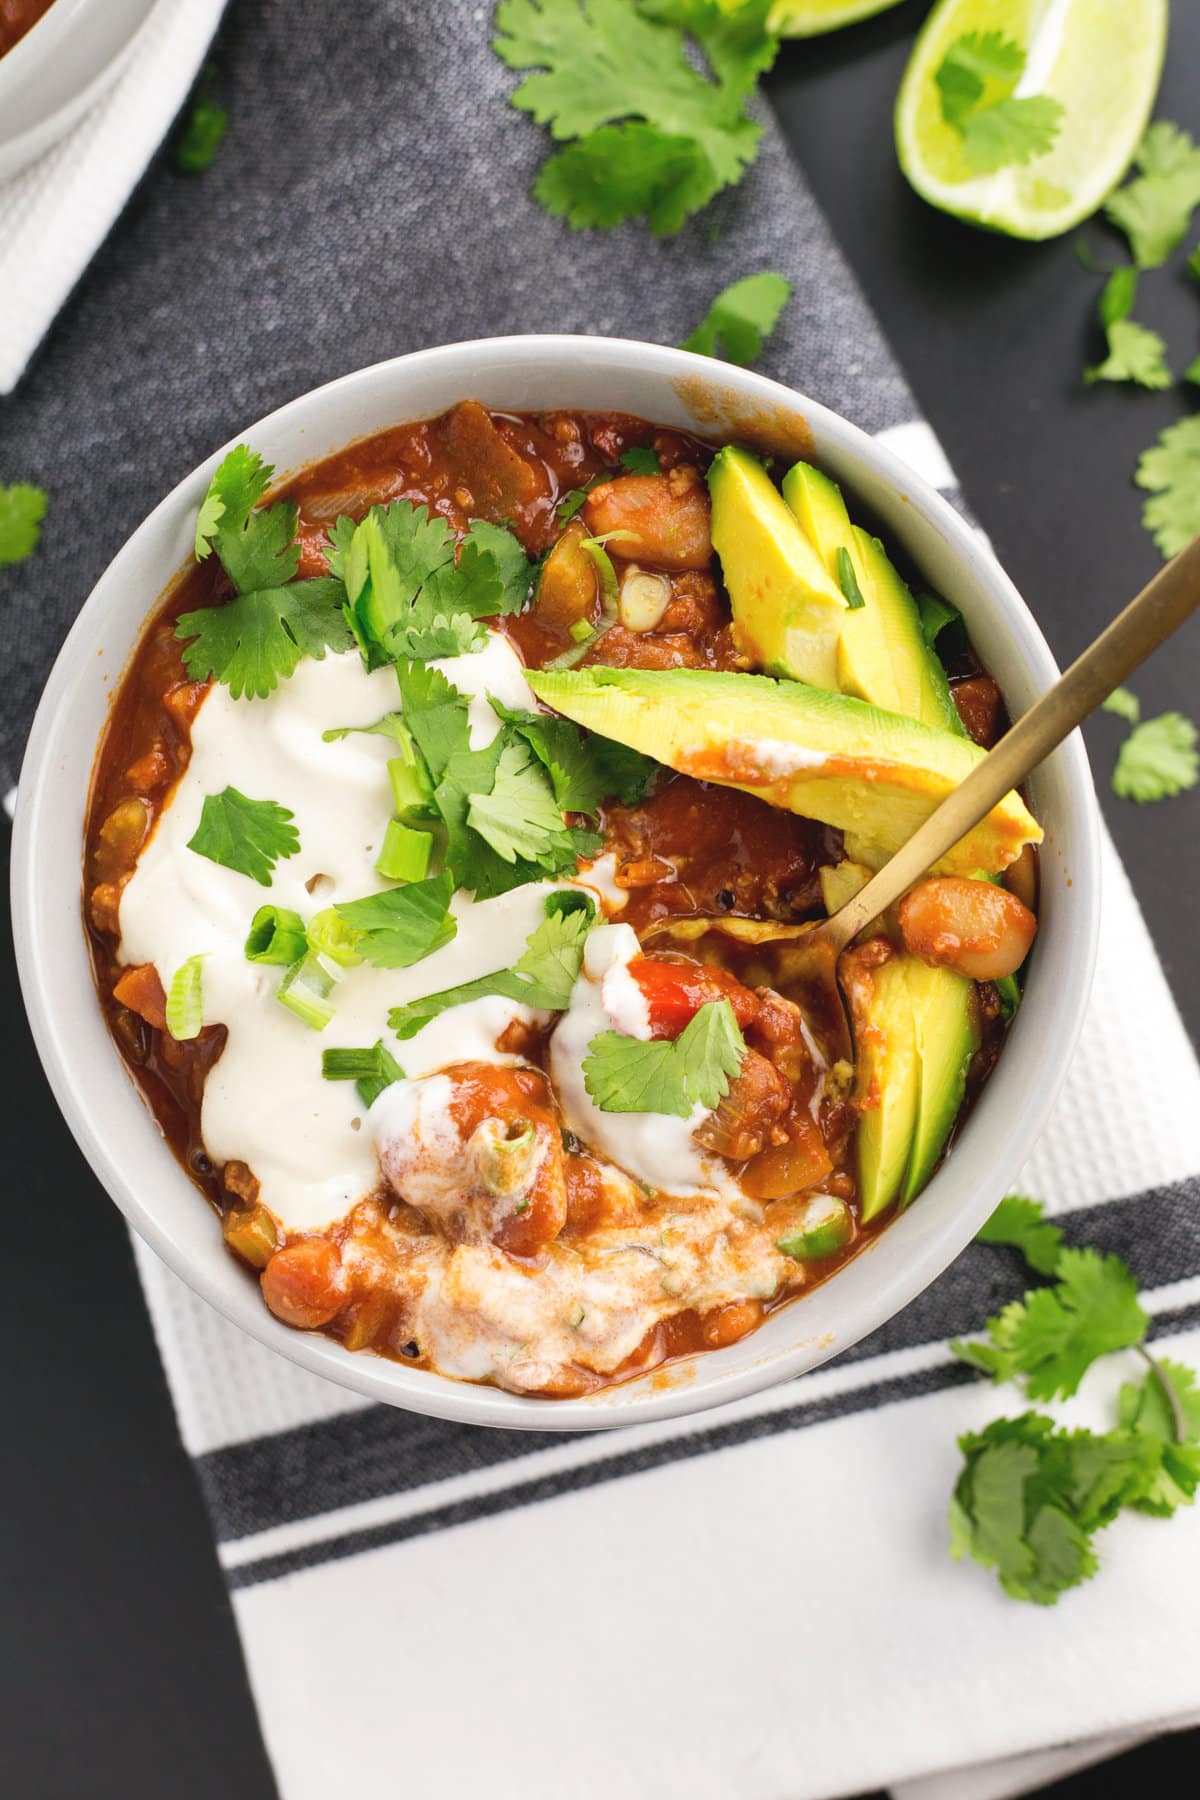 Vegan Chili Con Carne - a delicious, hearty and healthy one pot Chili Con Carne with Cashew Sour Cream. #vegan #vegetarian #chili #healthy #reciped